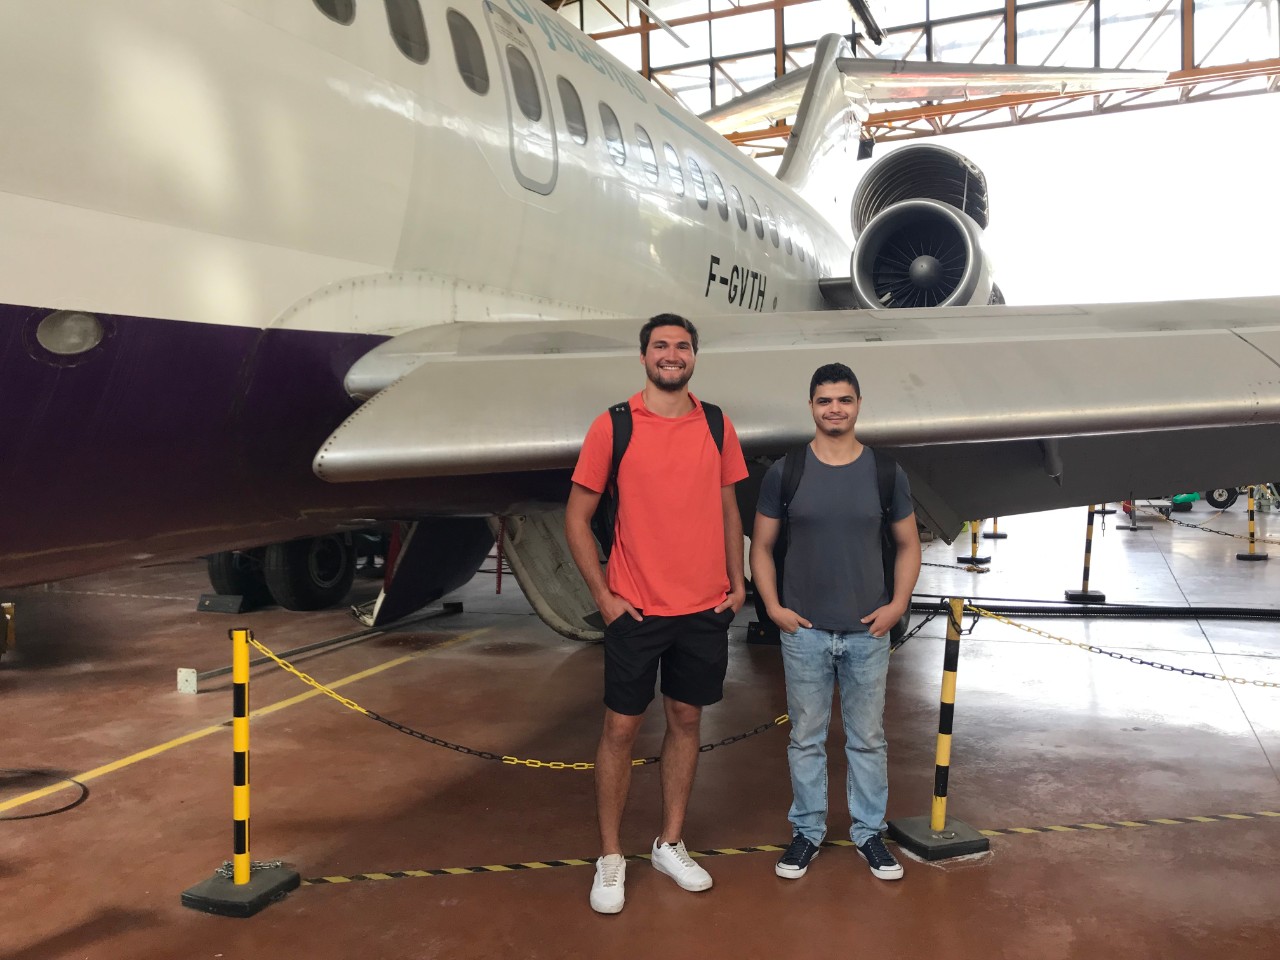 Will Mnich and another student at the airplane hangar